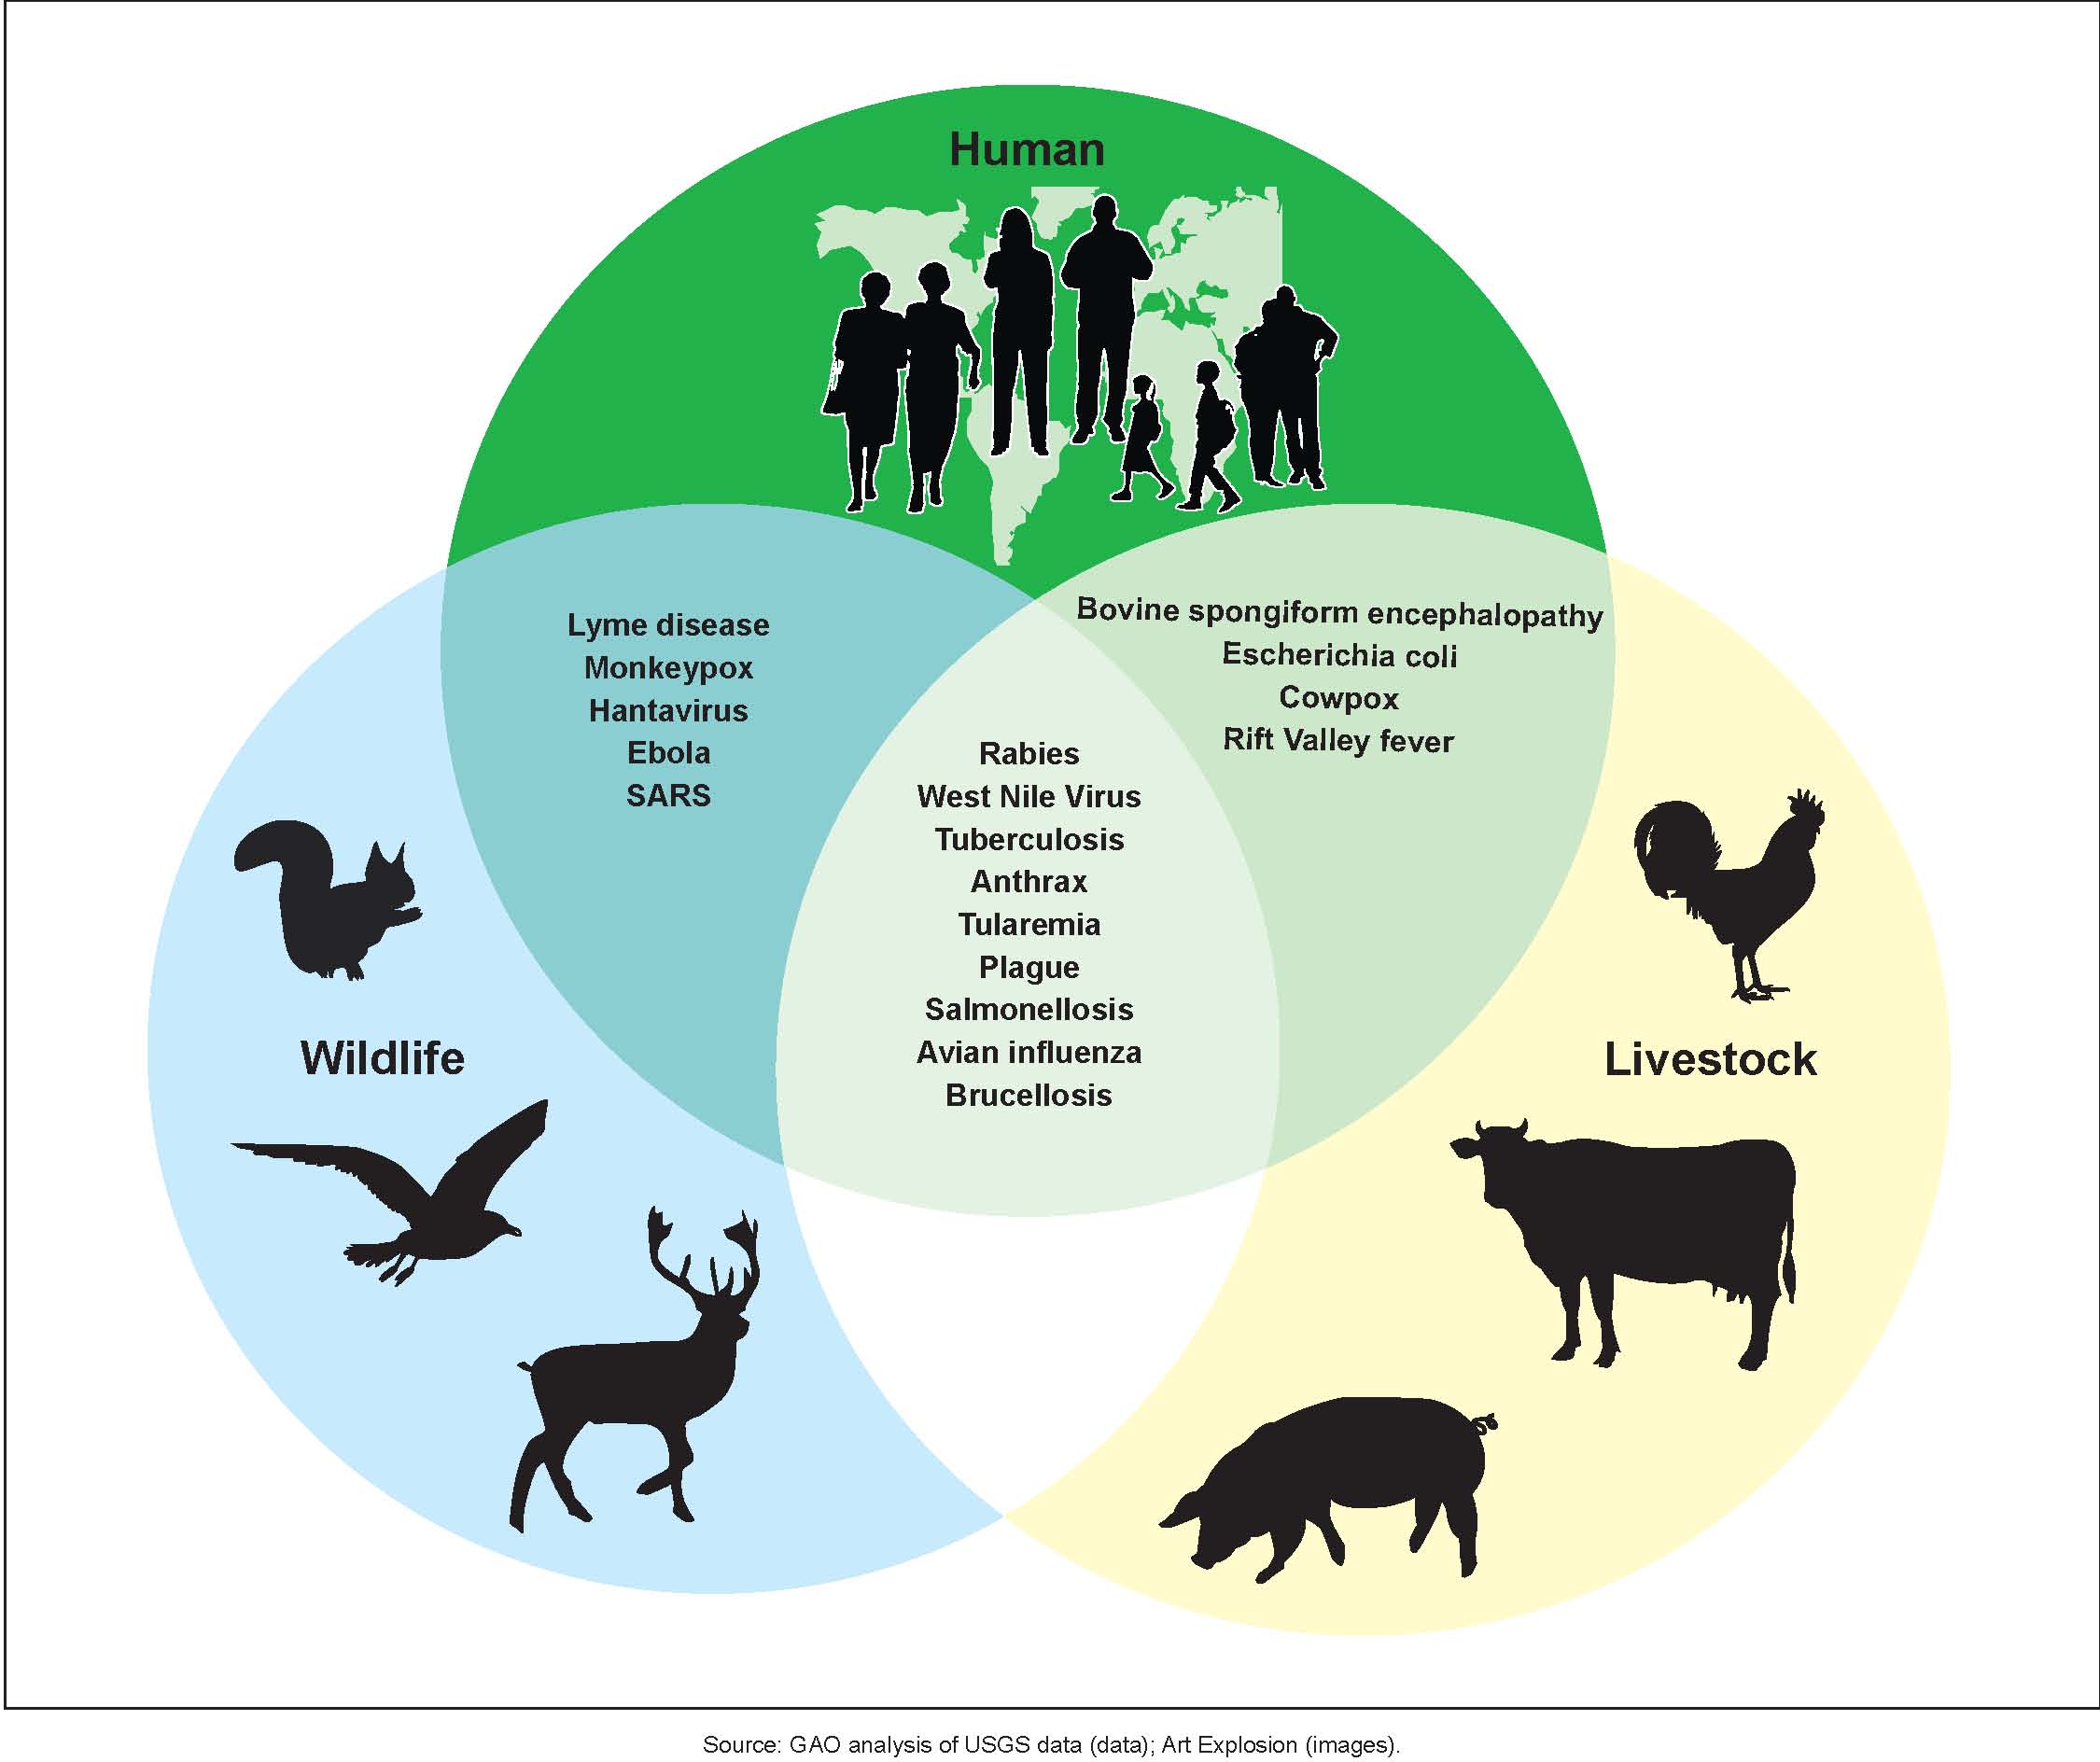 Examples of Zoonotic Diseases and Their Affected Populations